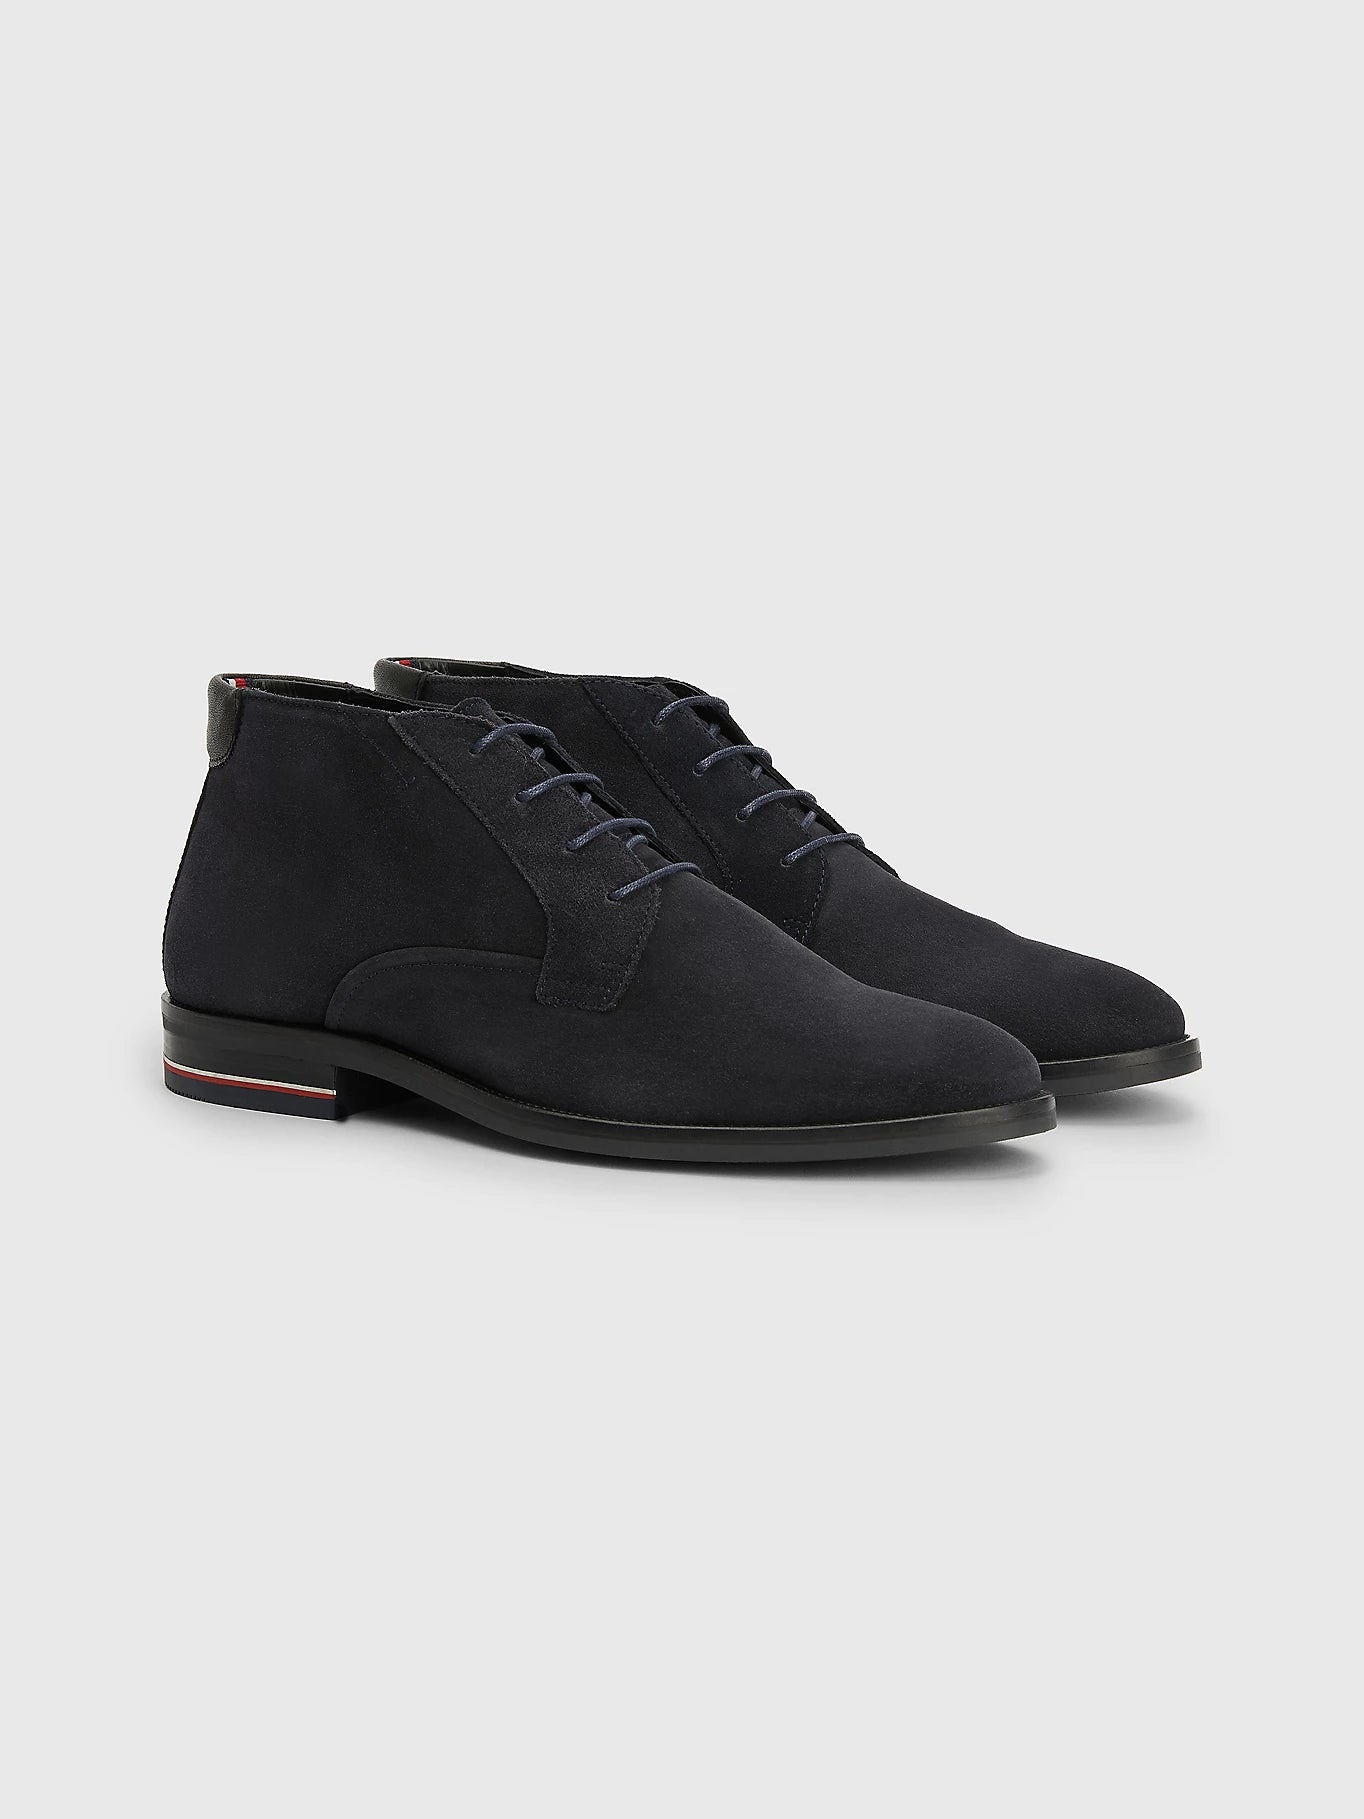 Tommy Hilfiger MENS Signature Suede Boot Navy